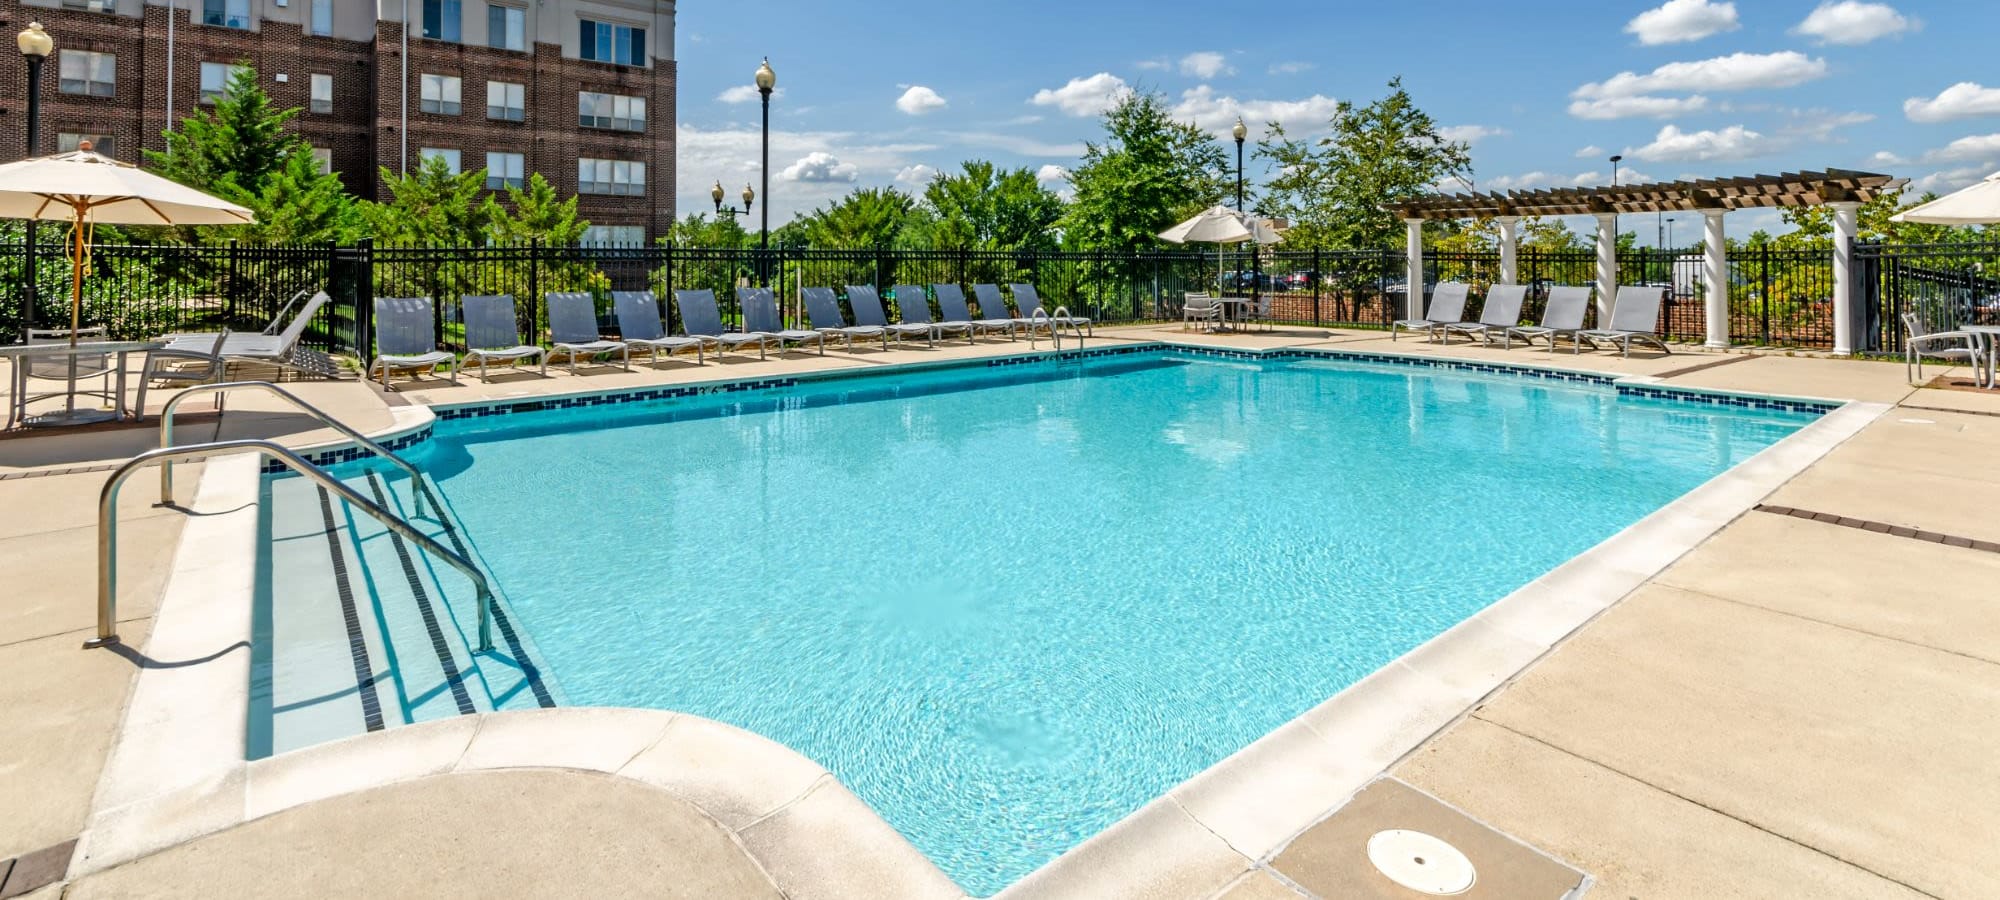 Apartments in Camp Springs Maryland